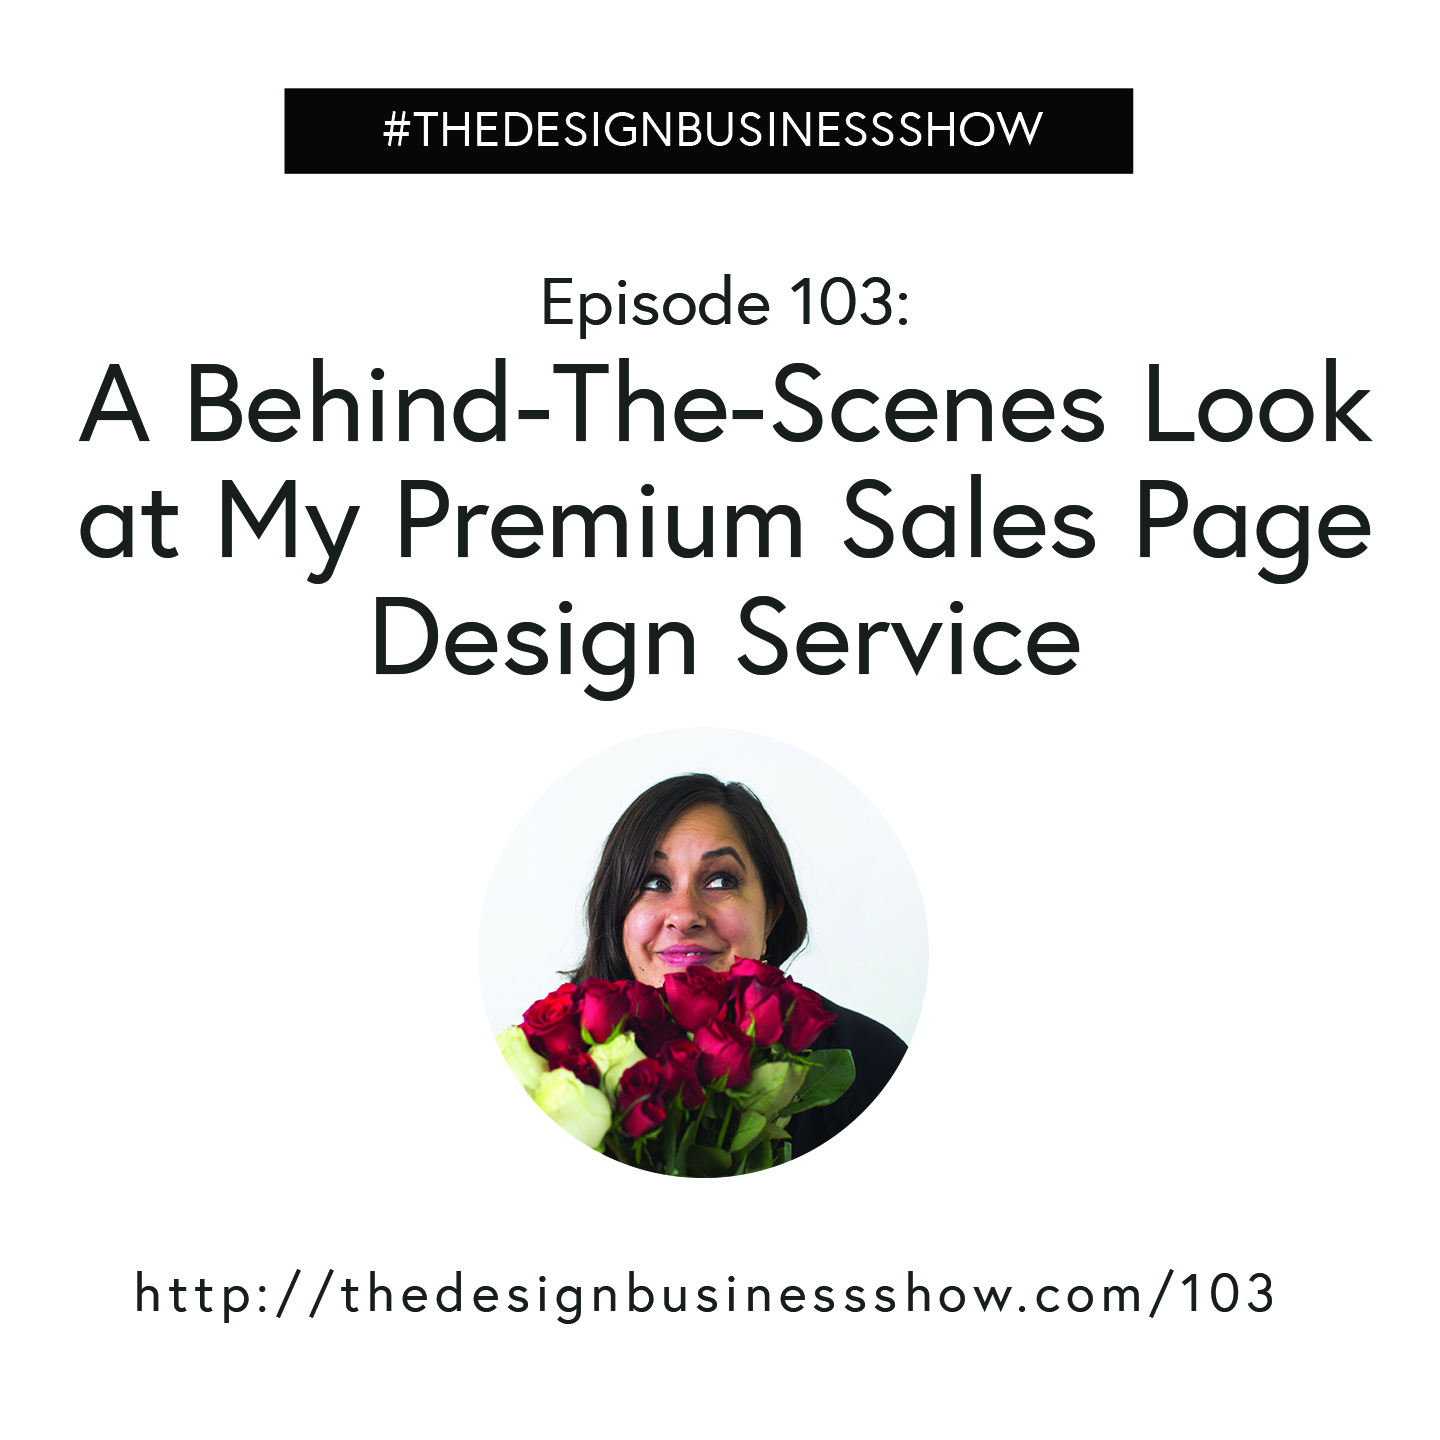 Get the inside look at my premium sales page design service!